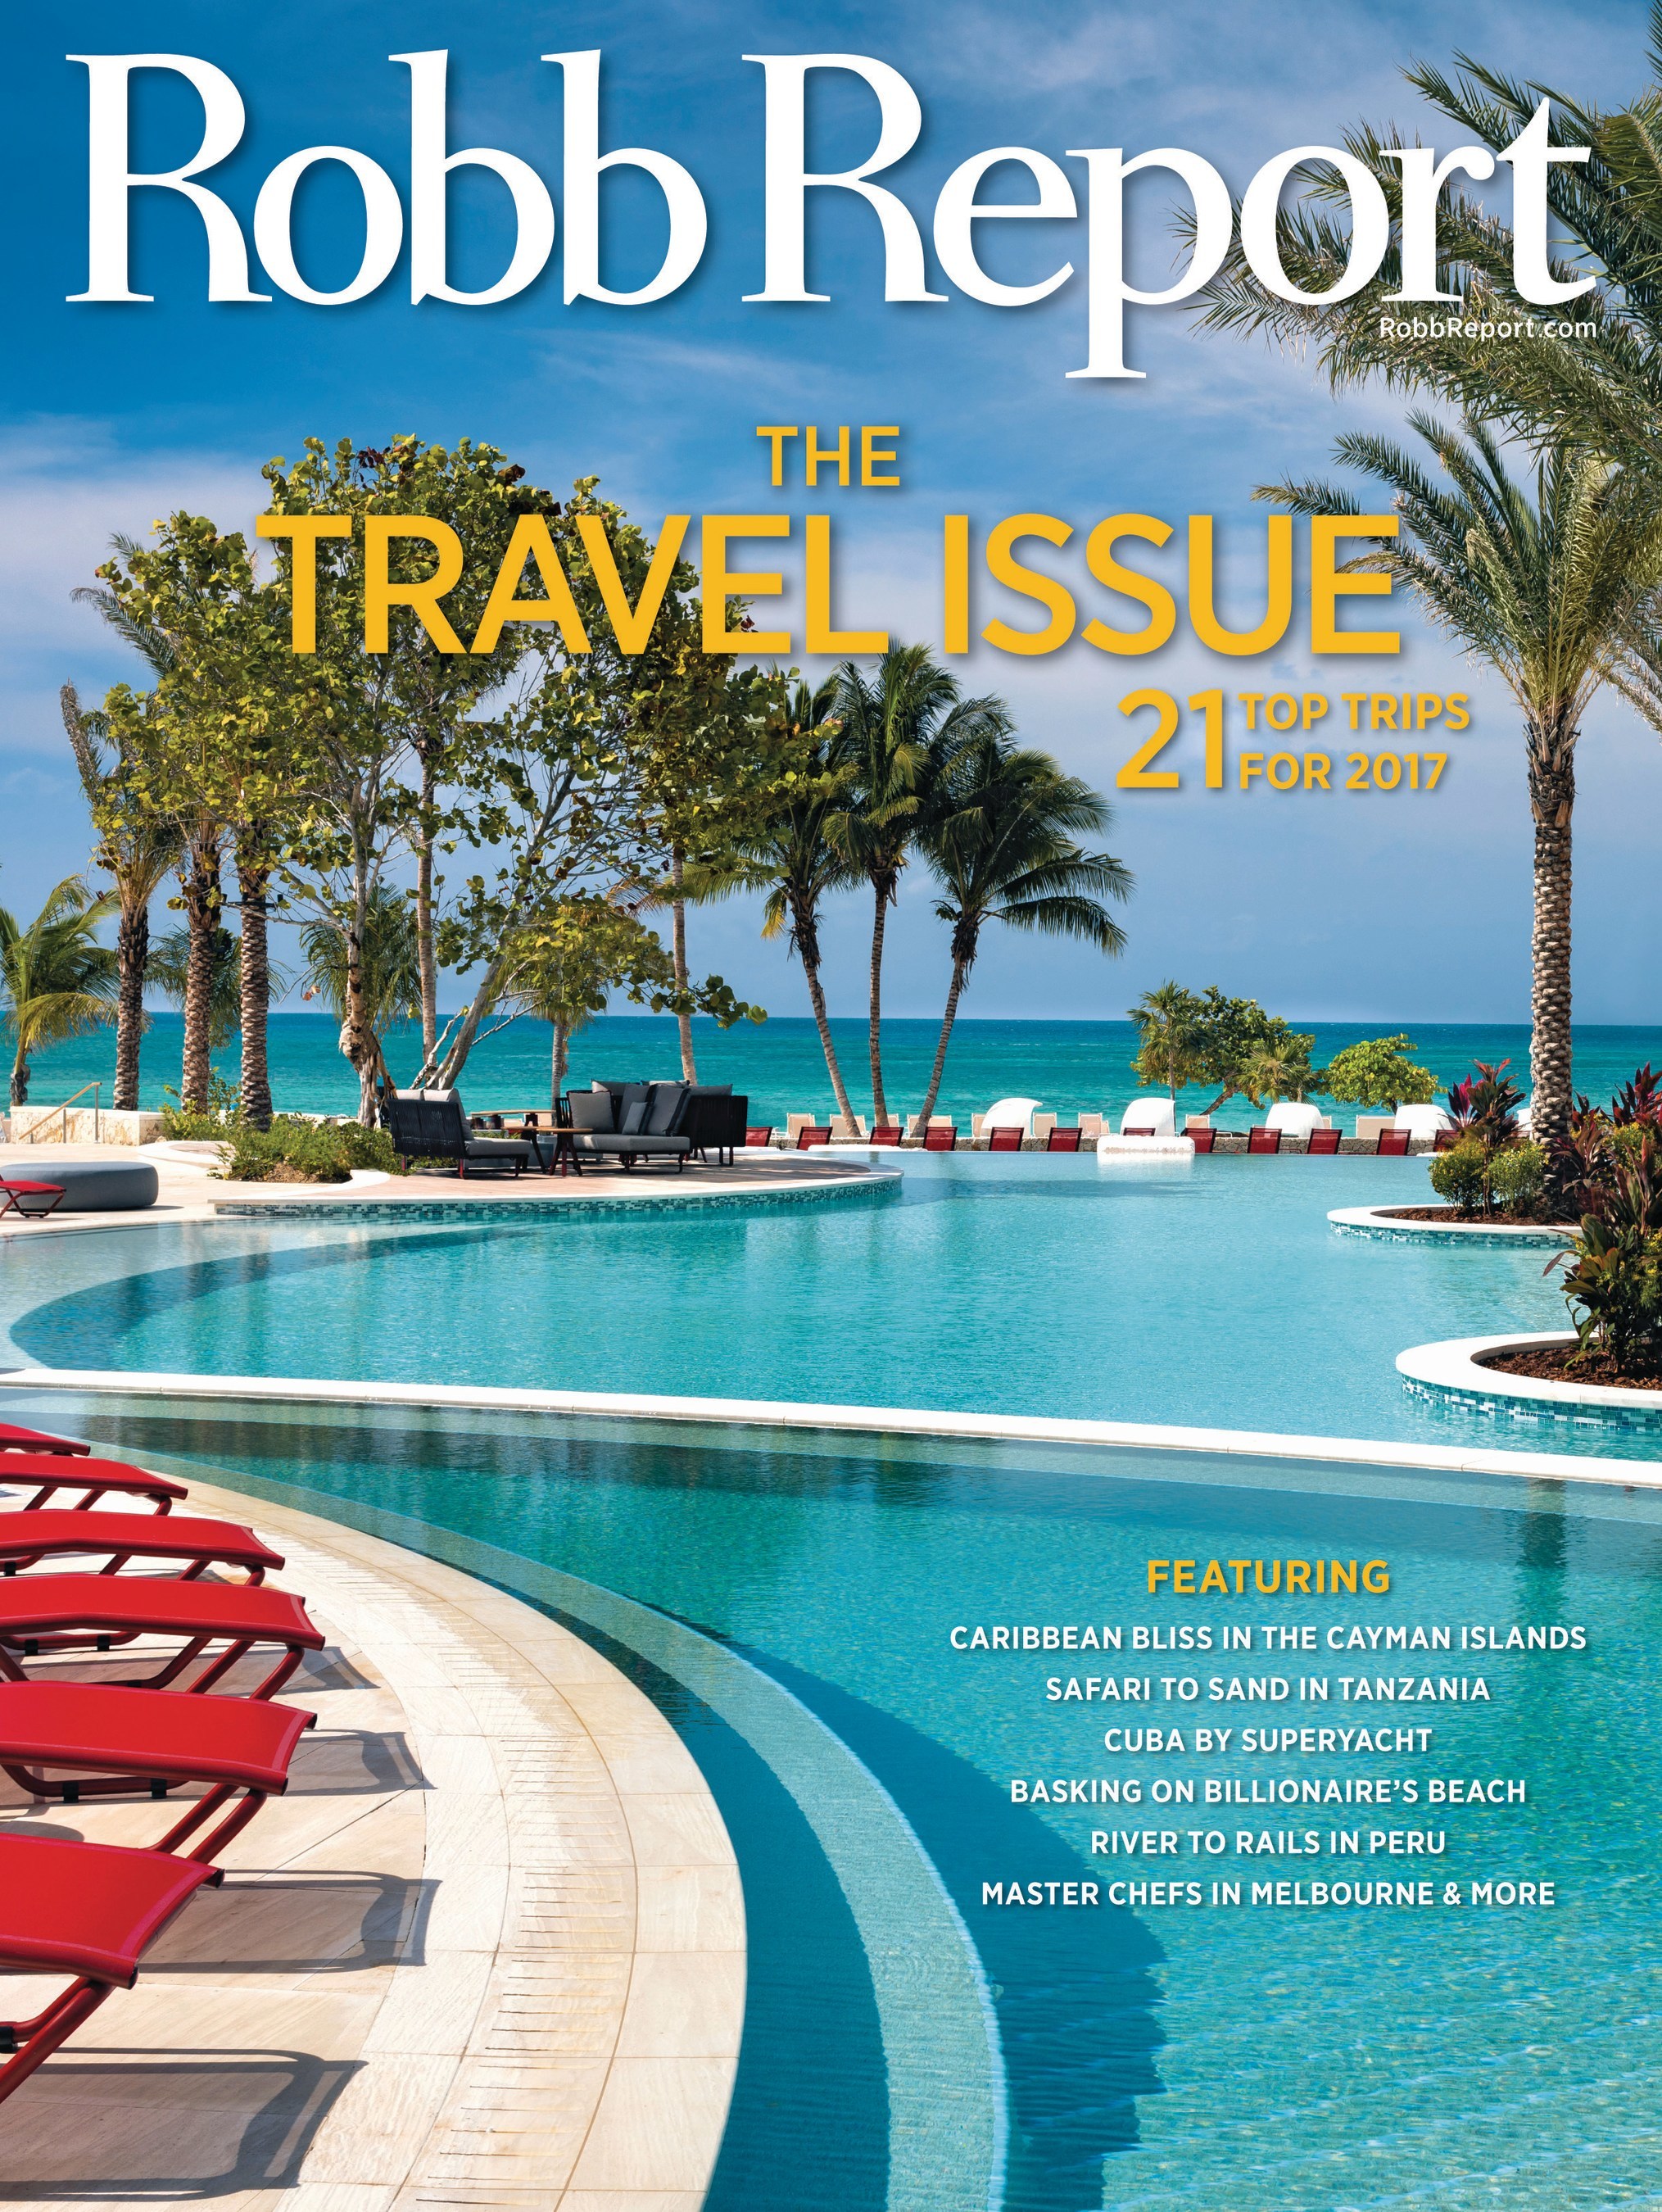 Robb Report Reveals Top Trips For 2017 With Annual Travel Issue2029 x 2700